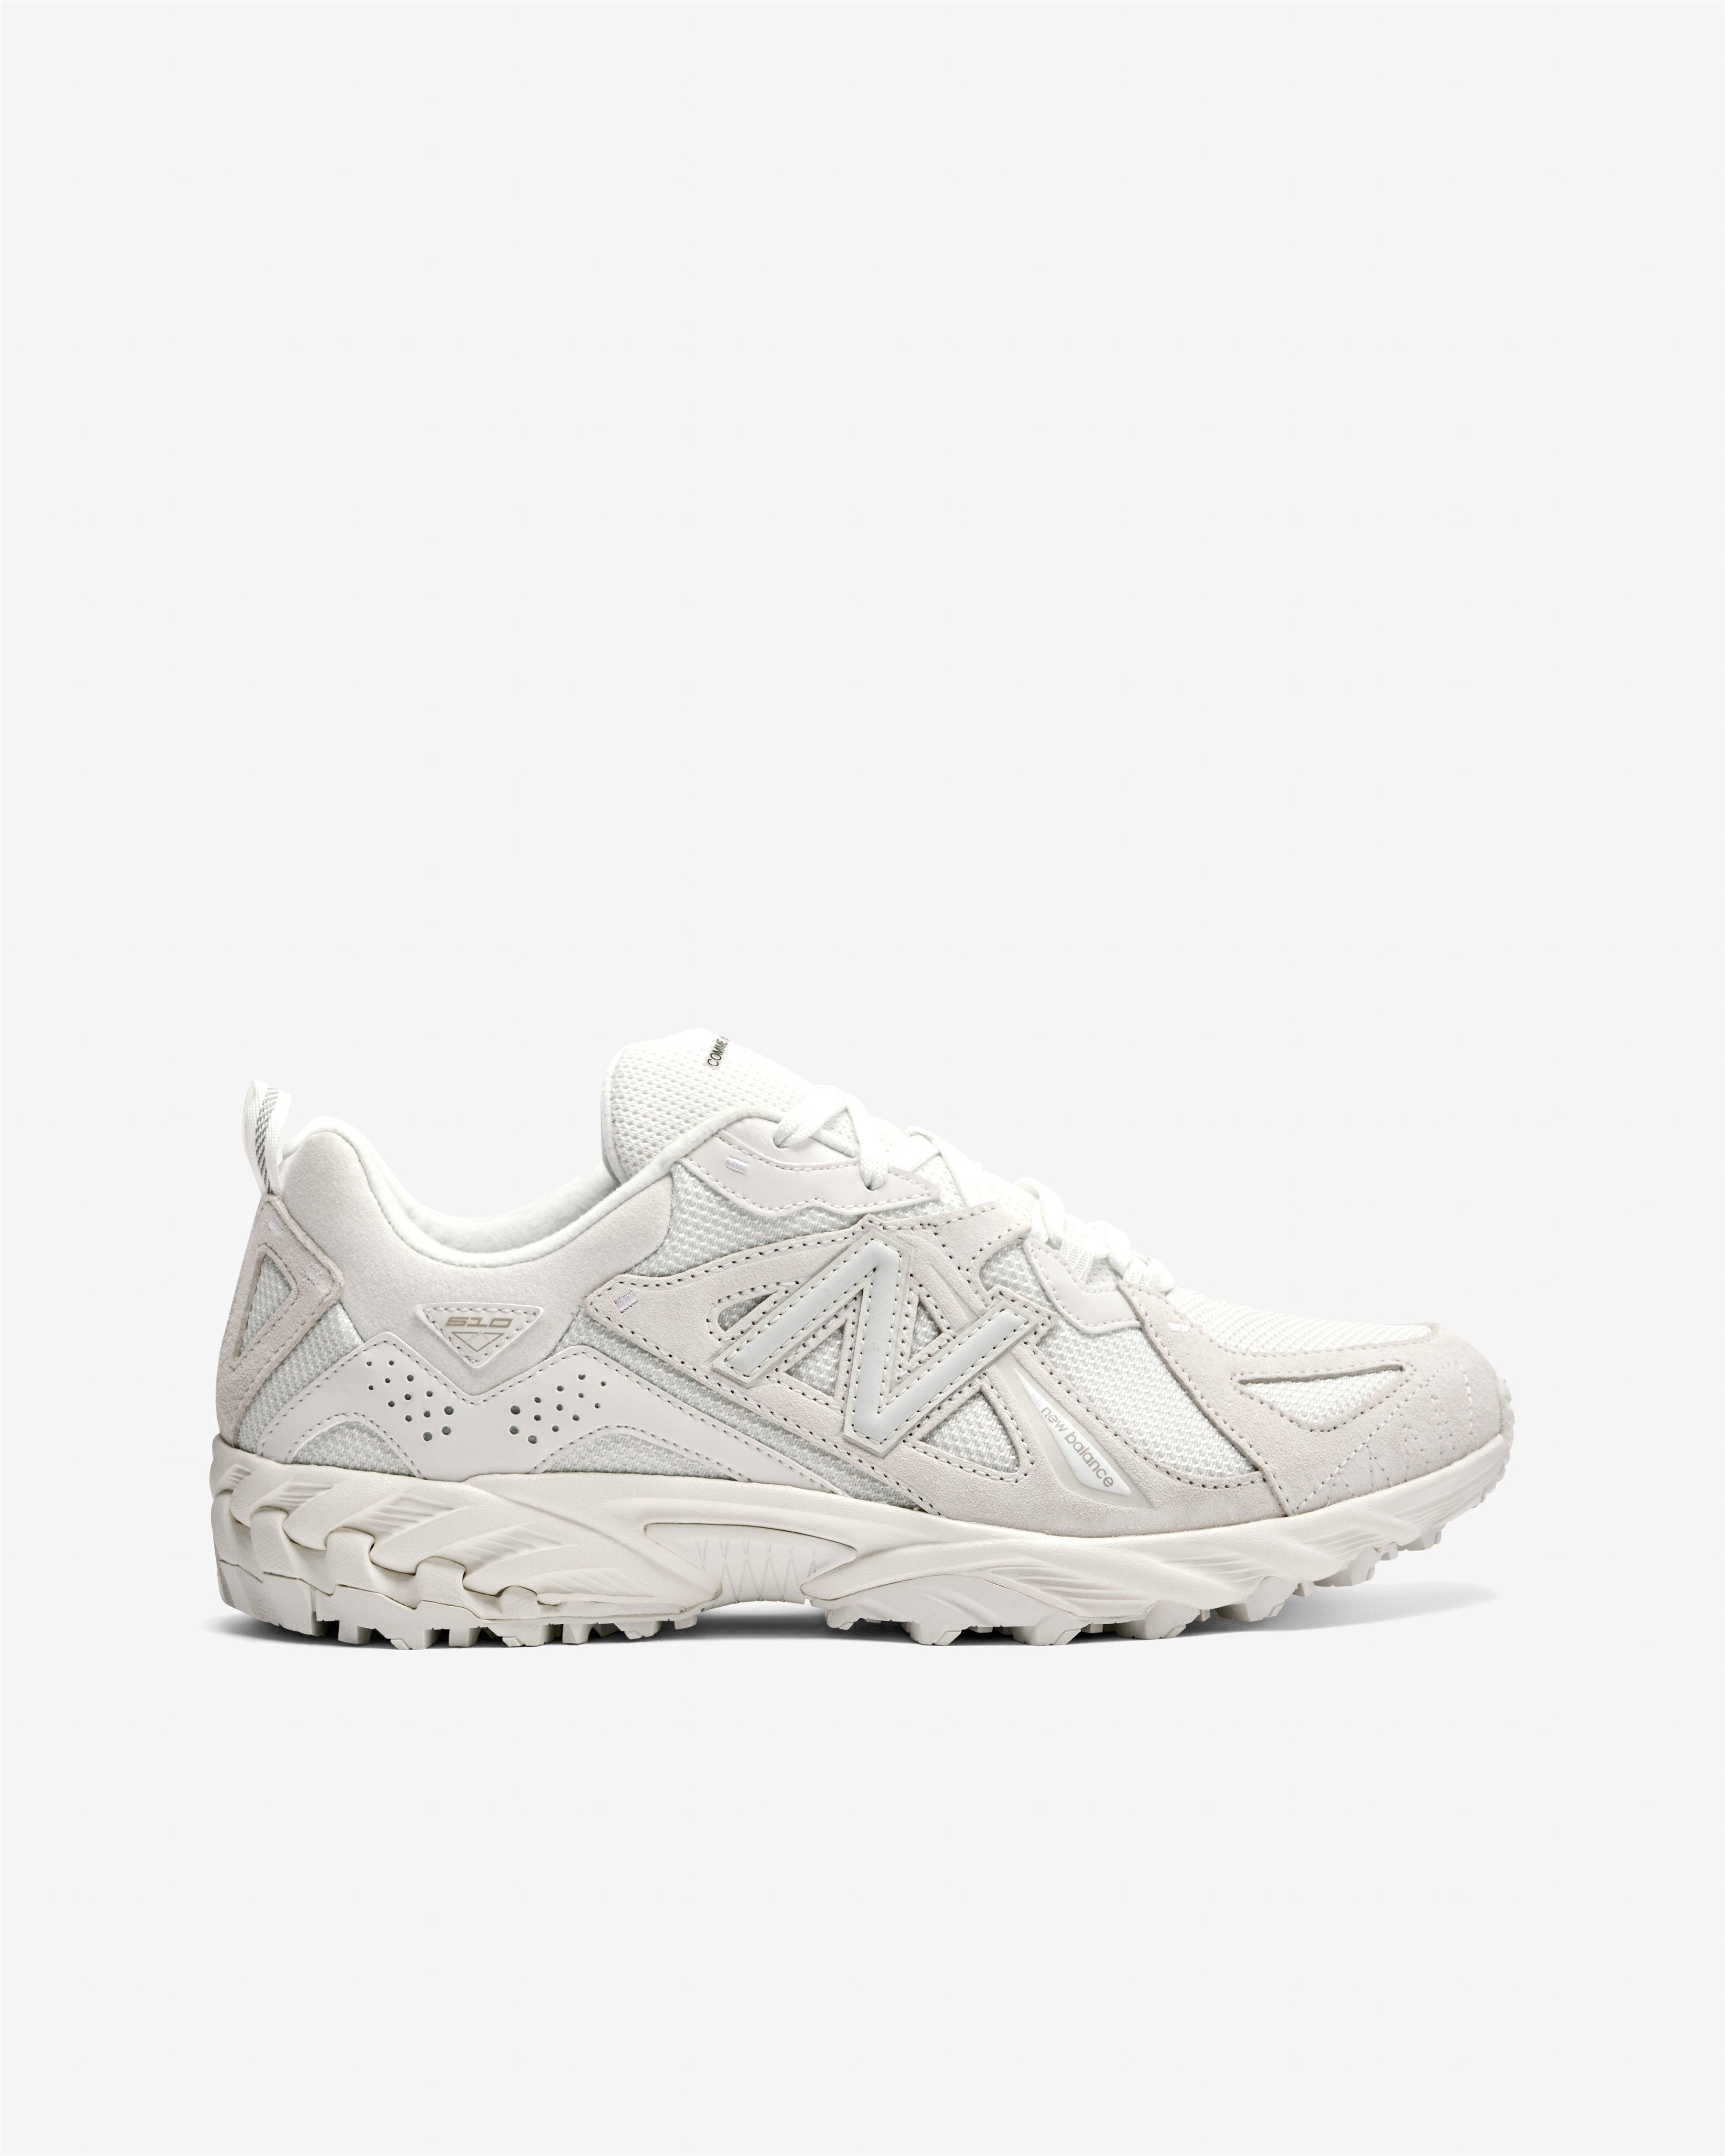 Comme des Garçons Homme - New Balance ML610TCG - (White) by CDG HOMME